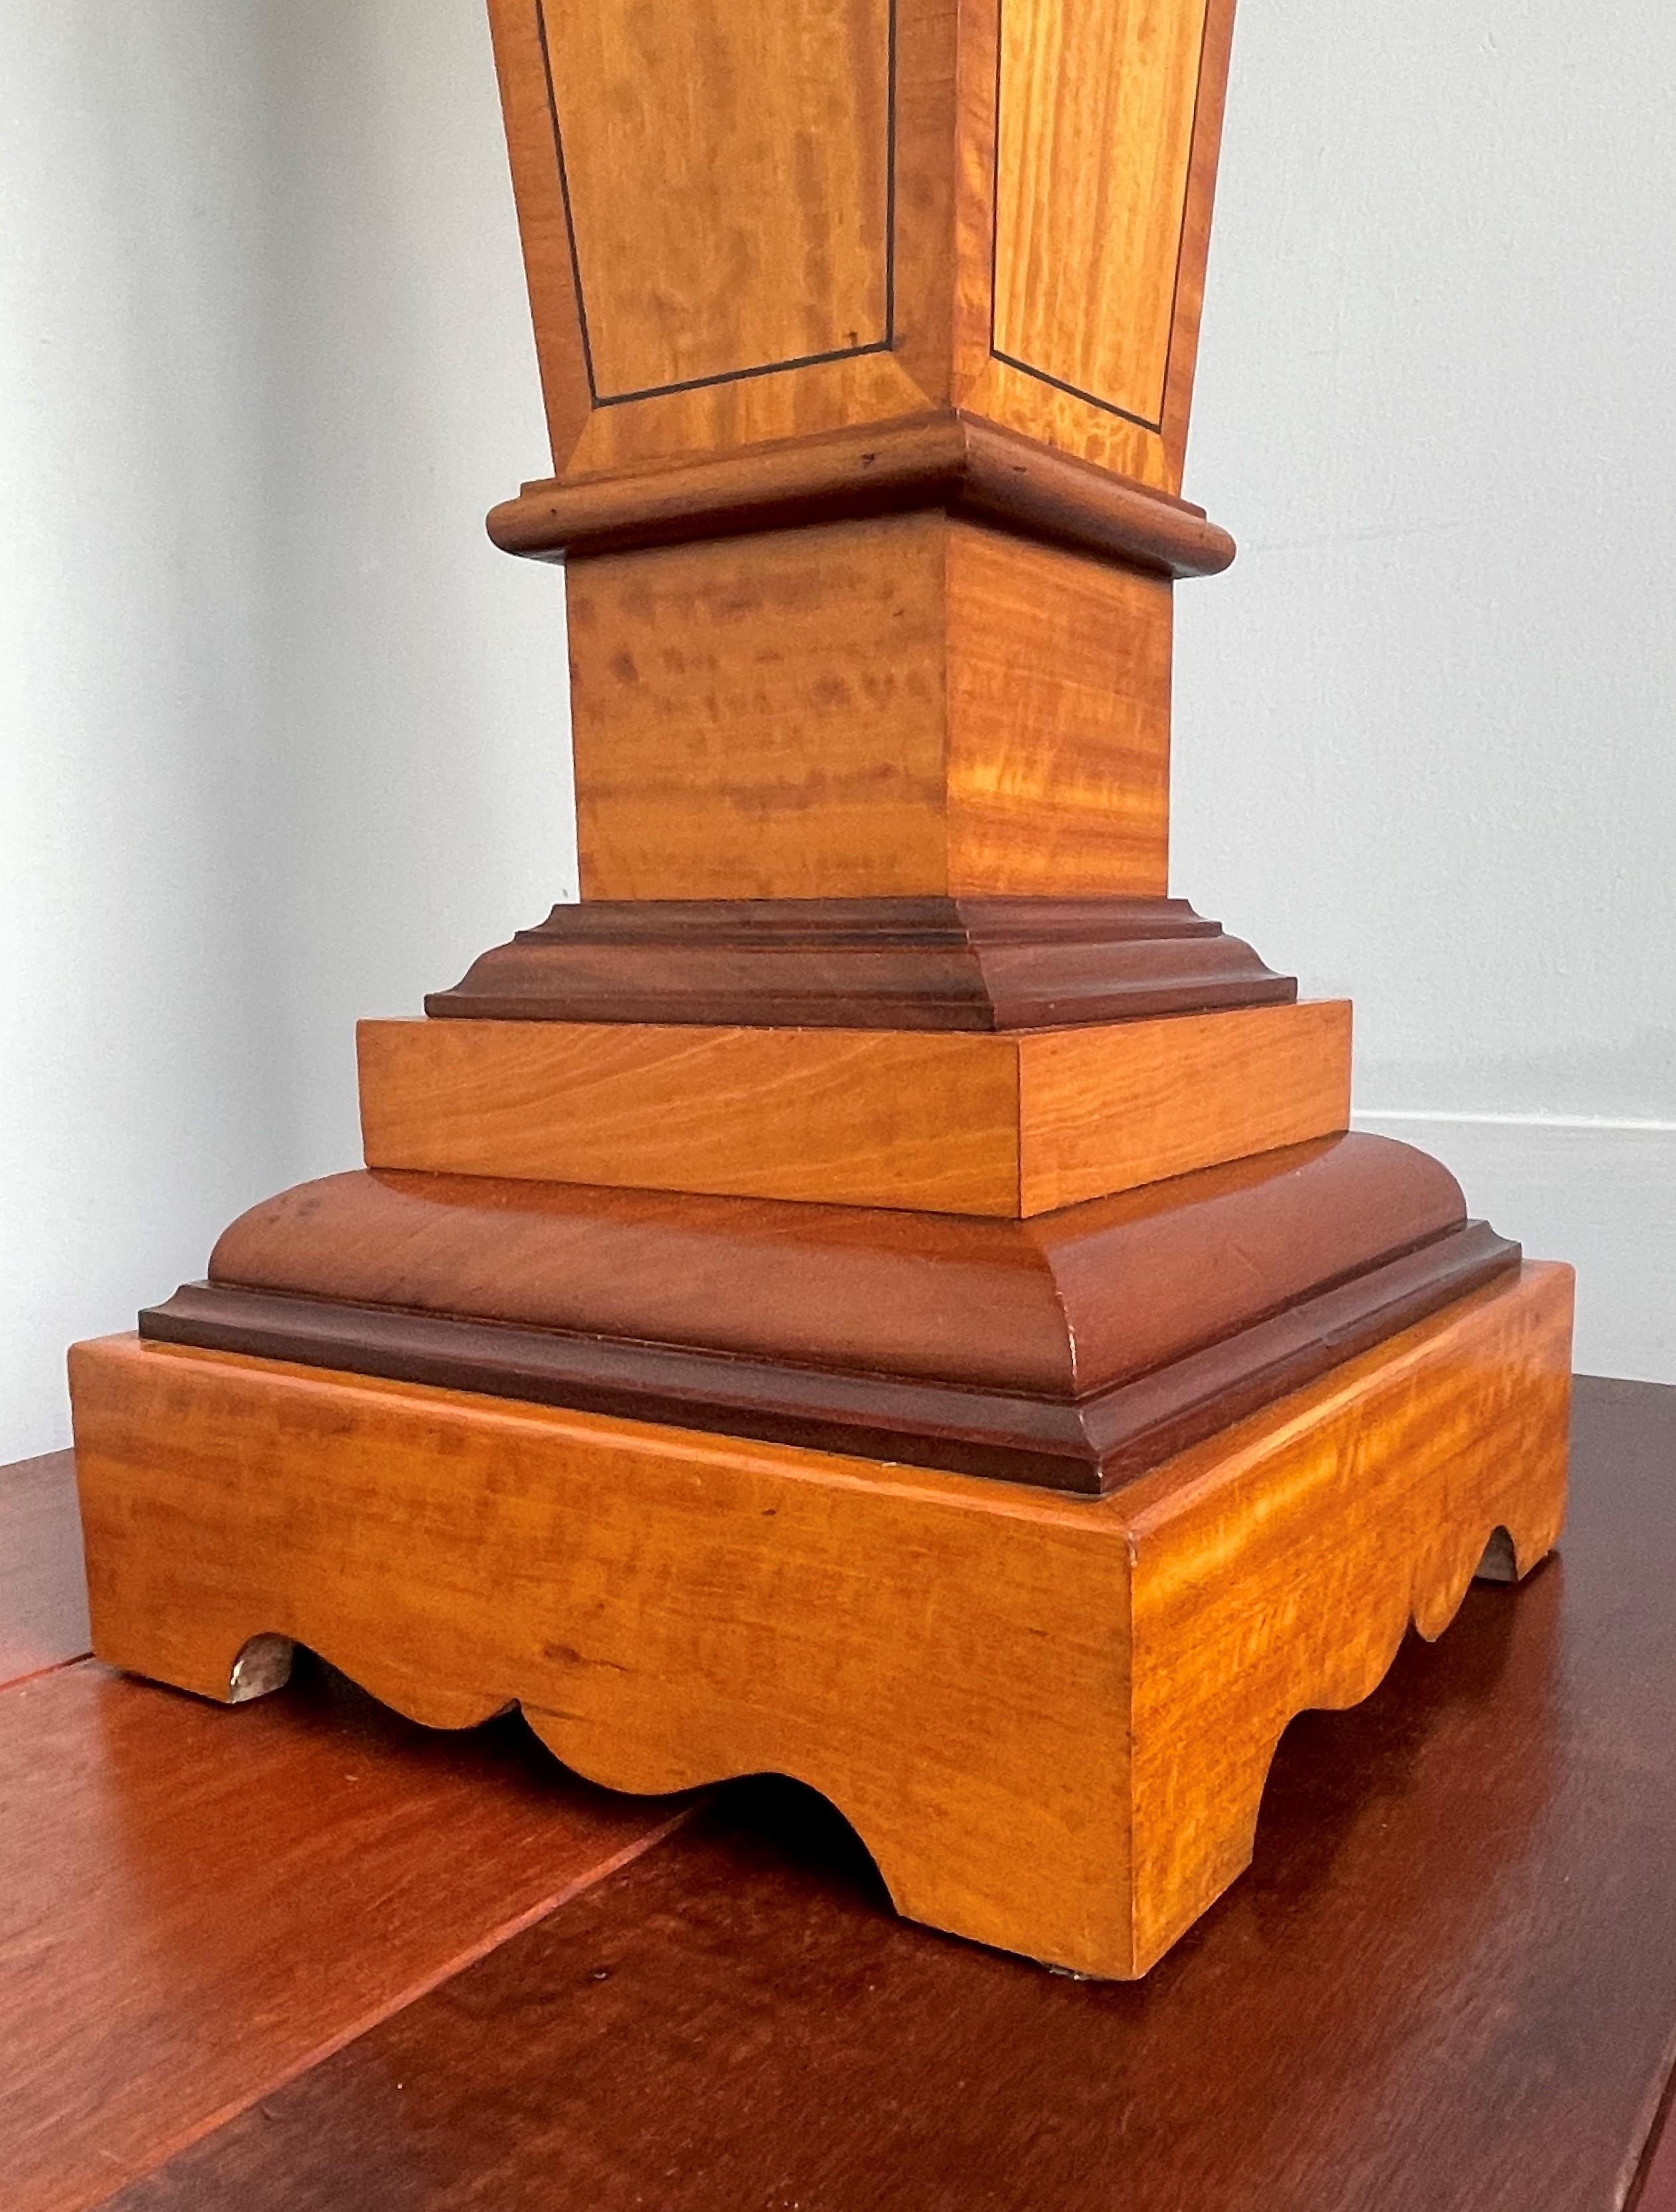 Hand-Crafted Stylish and Majestic Antique Satinwood & Teakwood Column Pedestal Stand ca. 1910